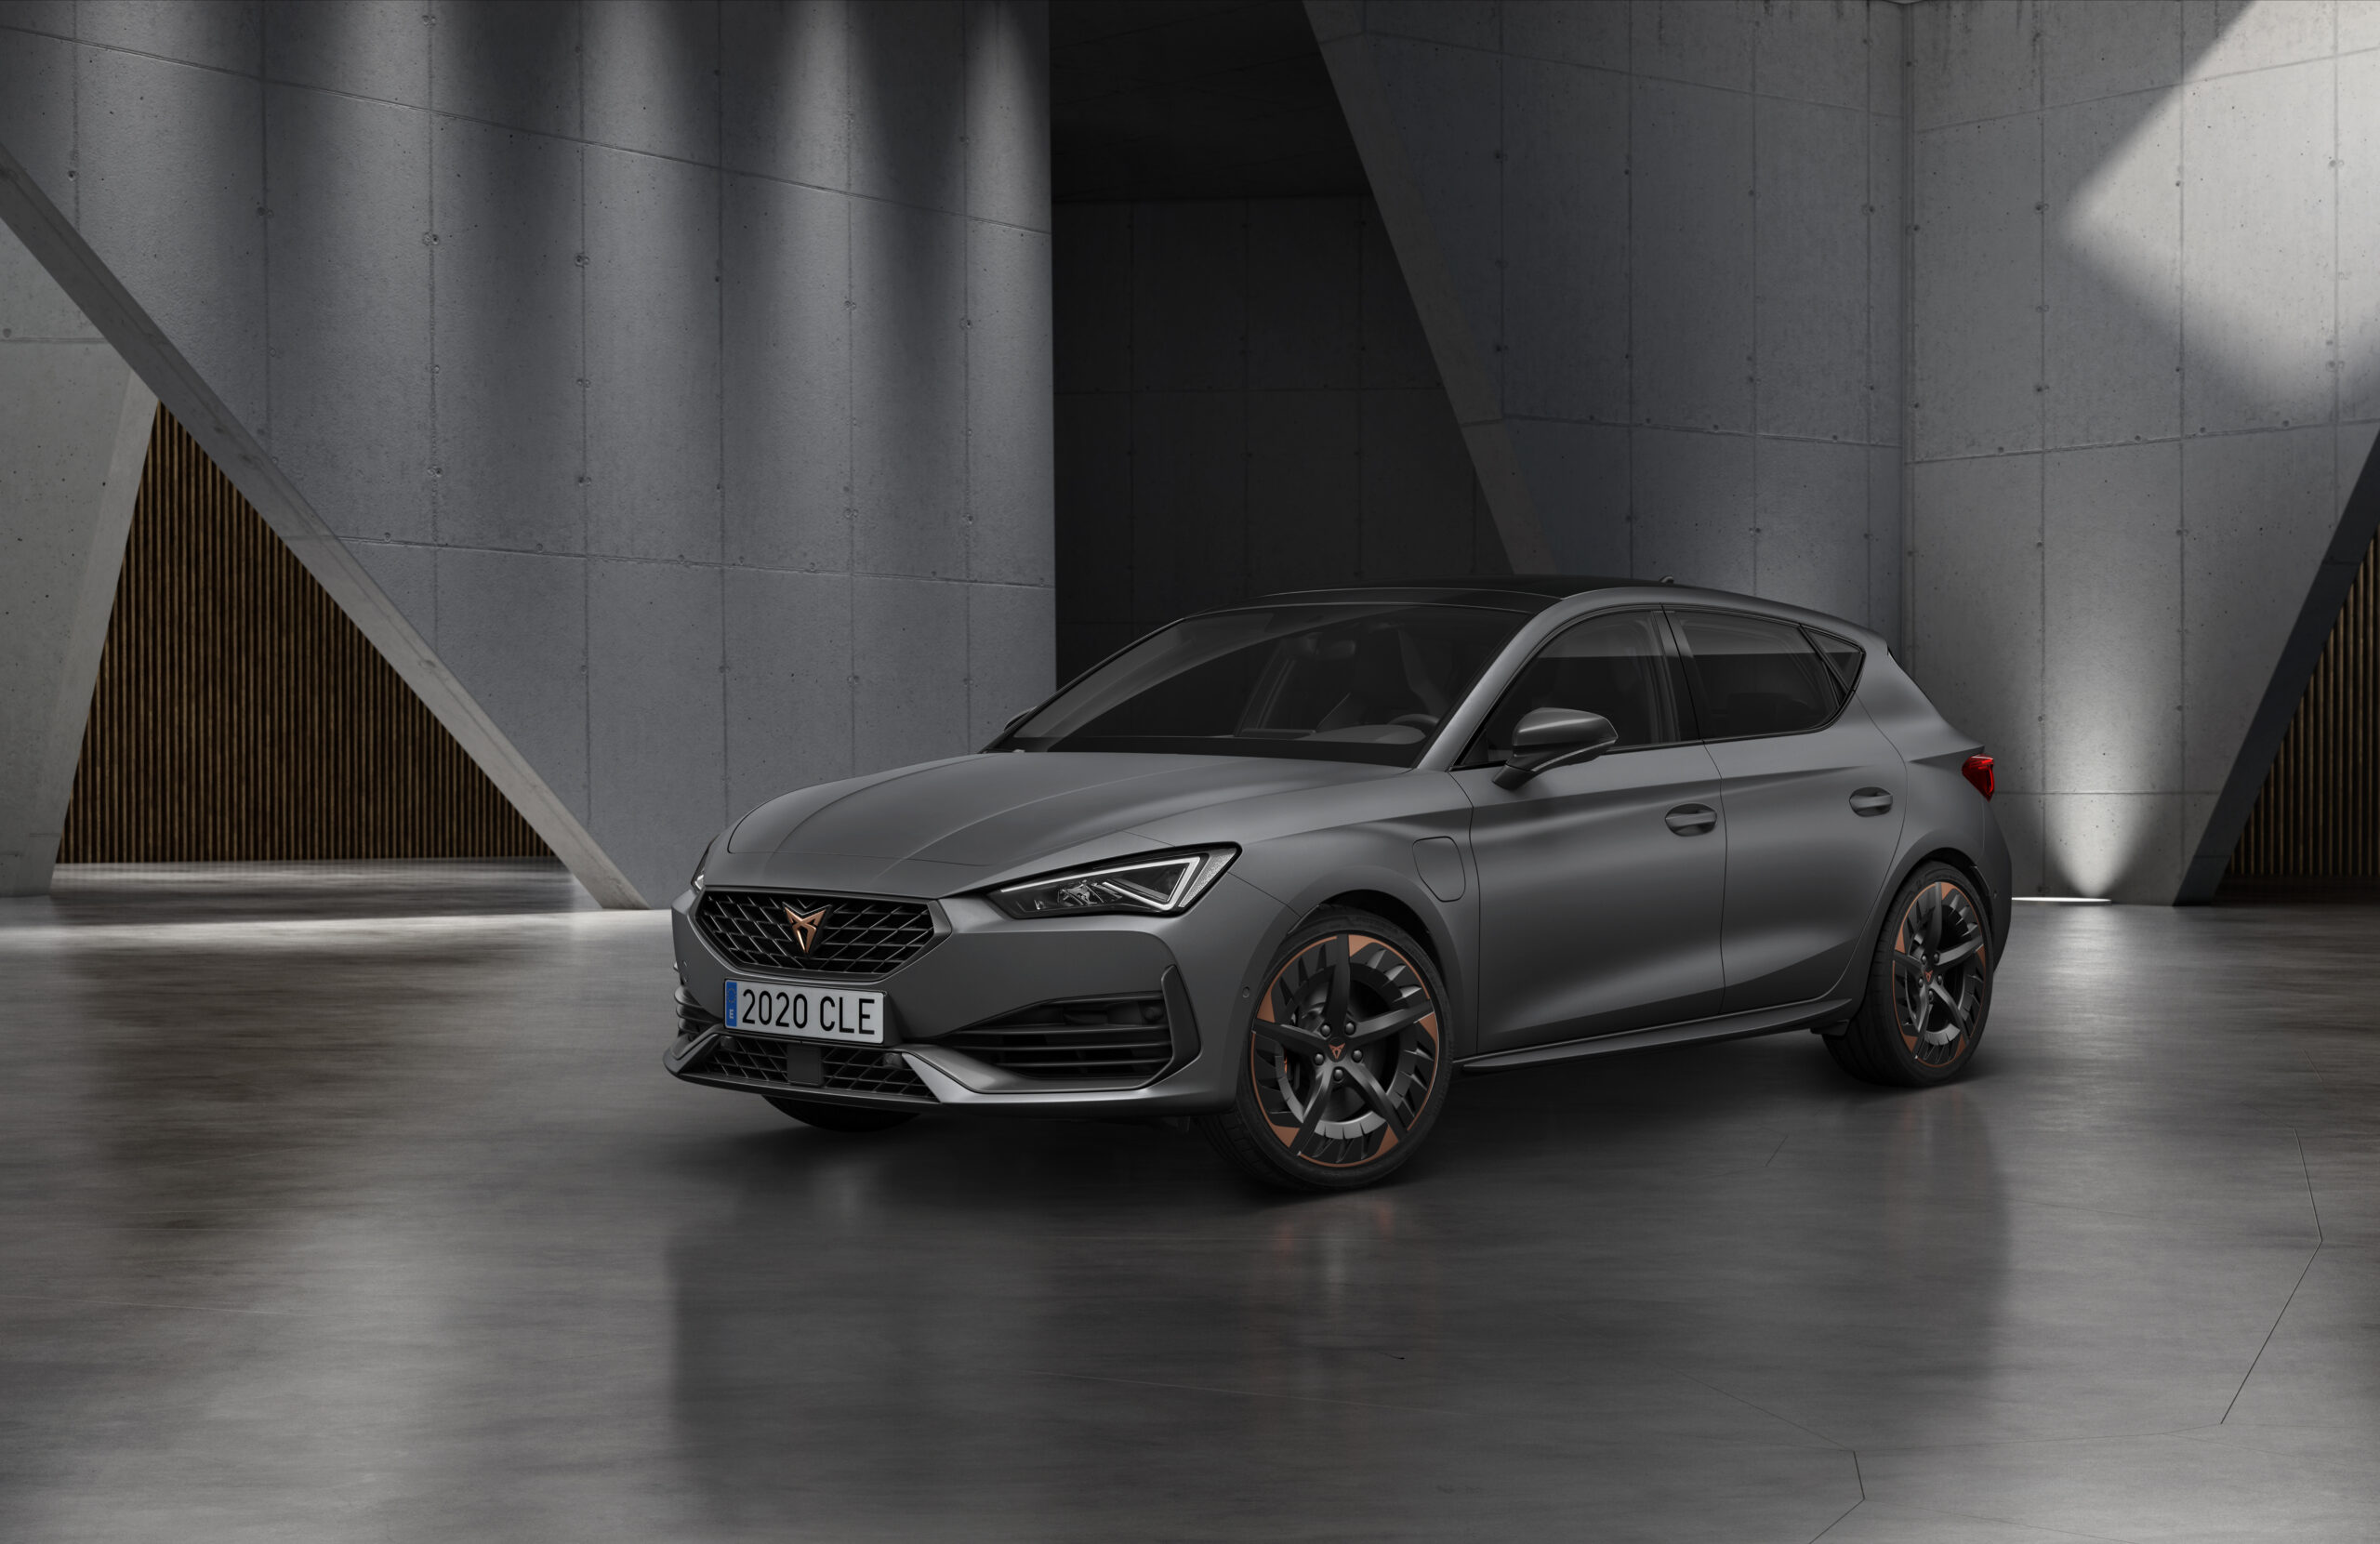 The Cupra Leon will go on sale in mid-2022 and include a plug-in hybrid (PHEV)